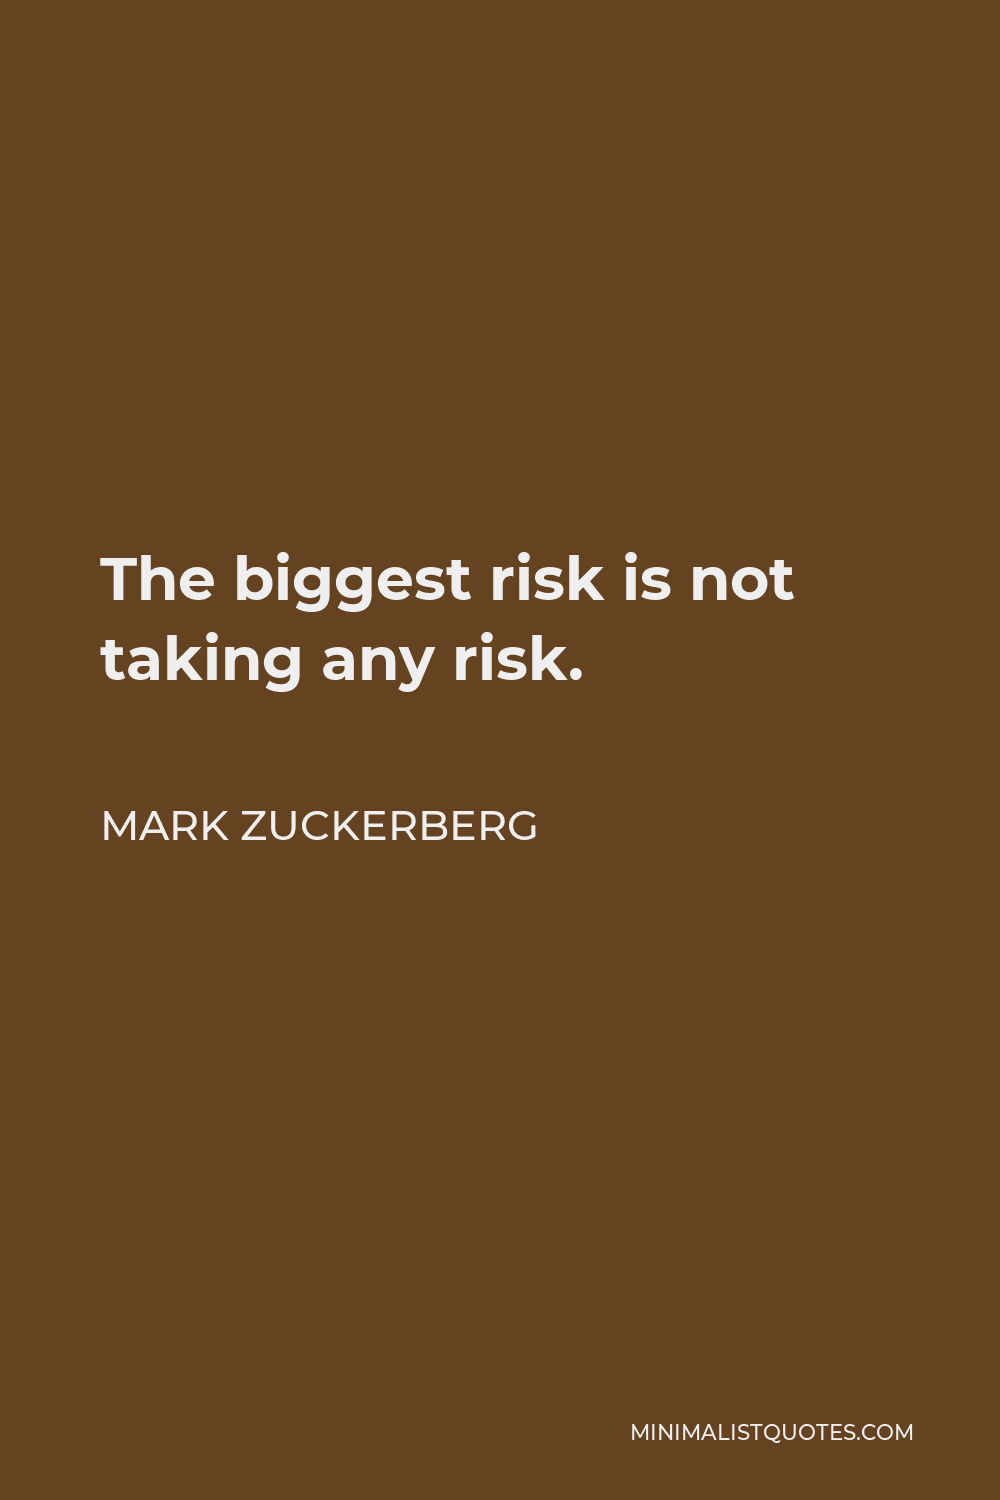 Mark Zuckerberg Quote - The biggest risk is not taking any risk.